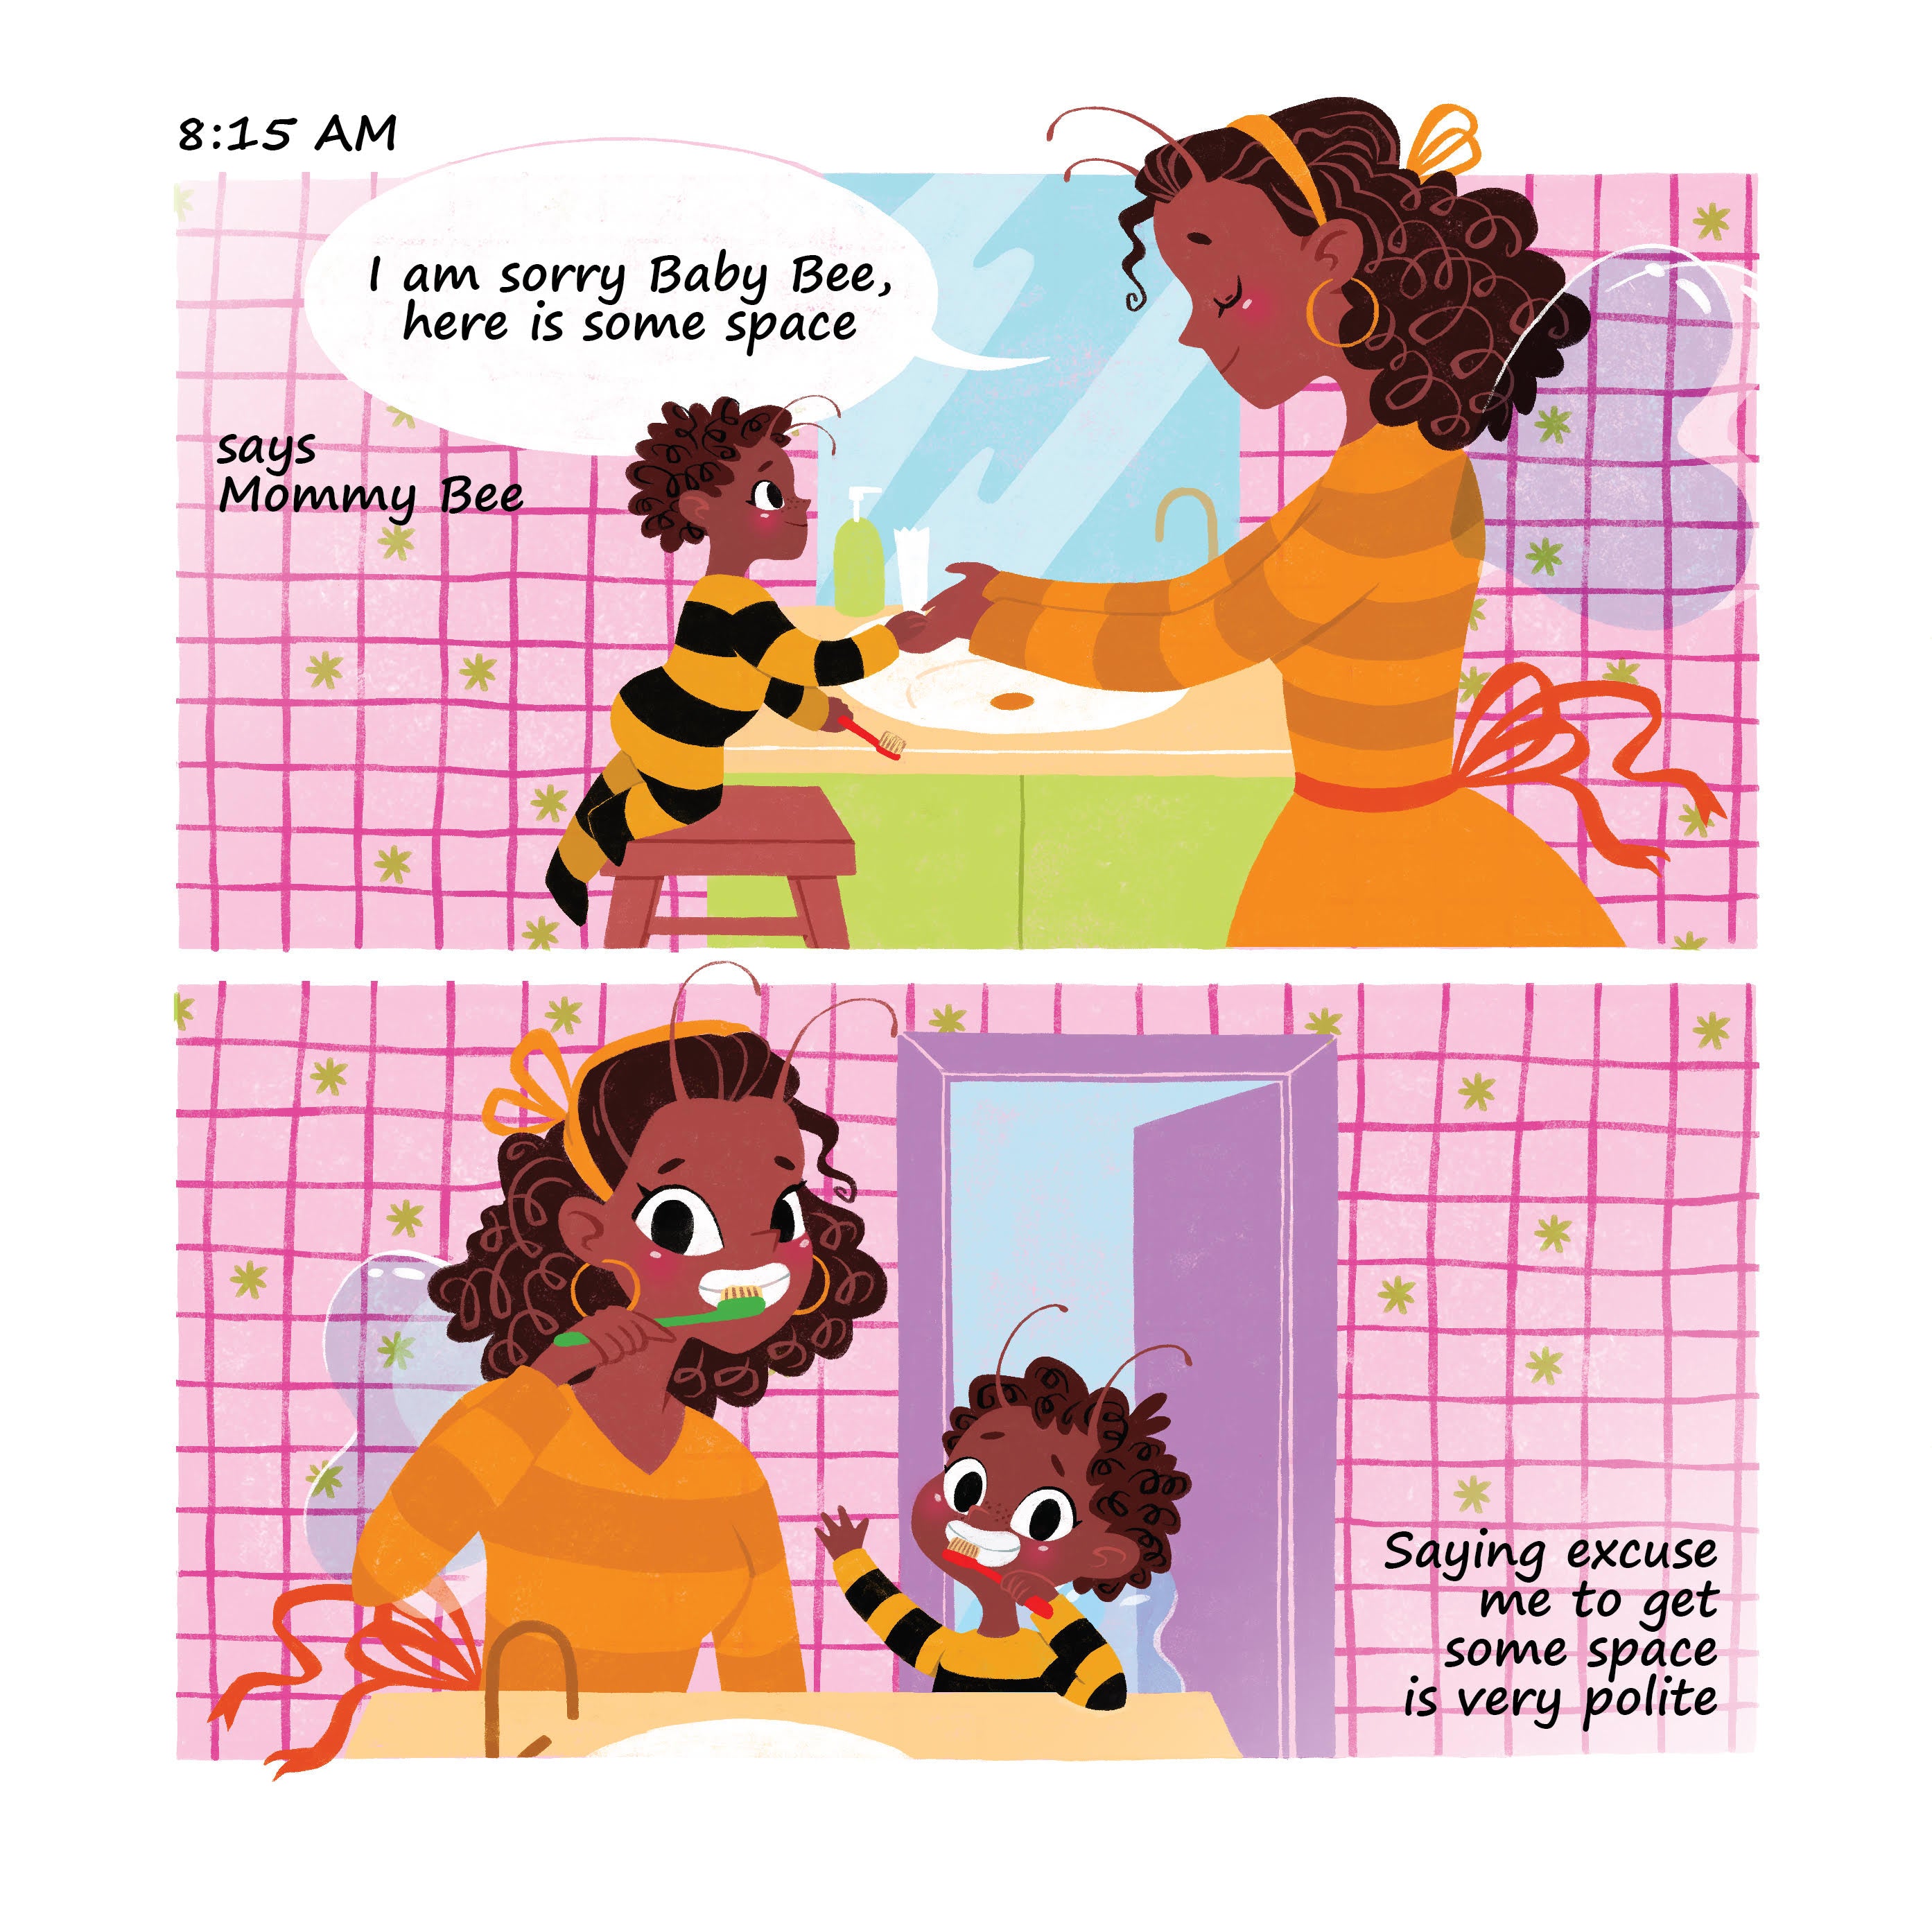 Baby Bee's Good Manners